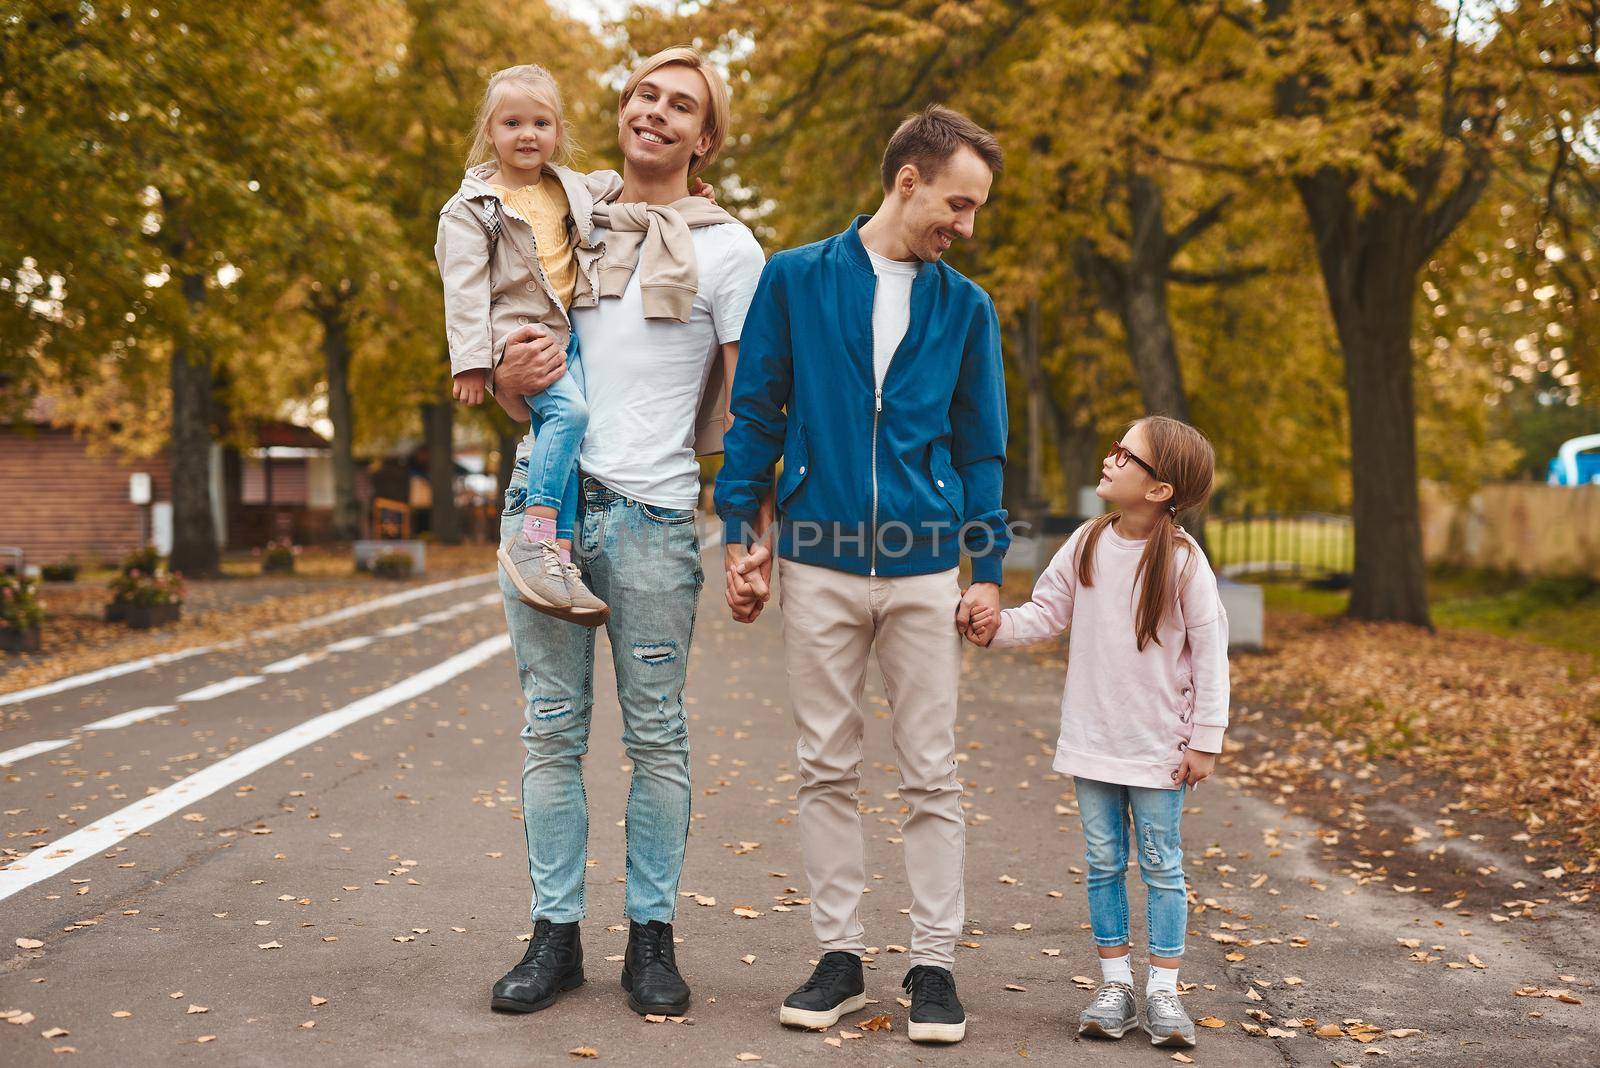 Two gay parents with their adopted daughters walking in park together. Happy LGBT family concept.